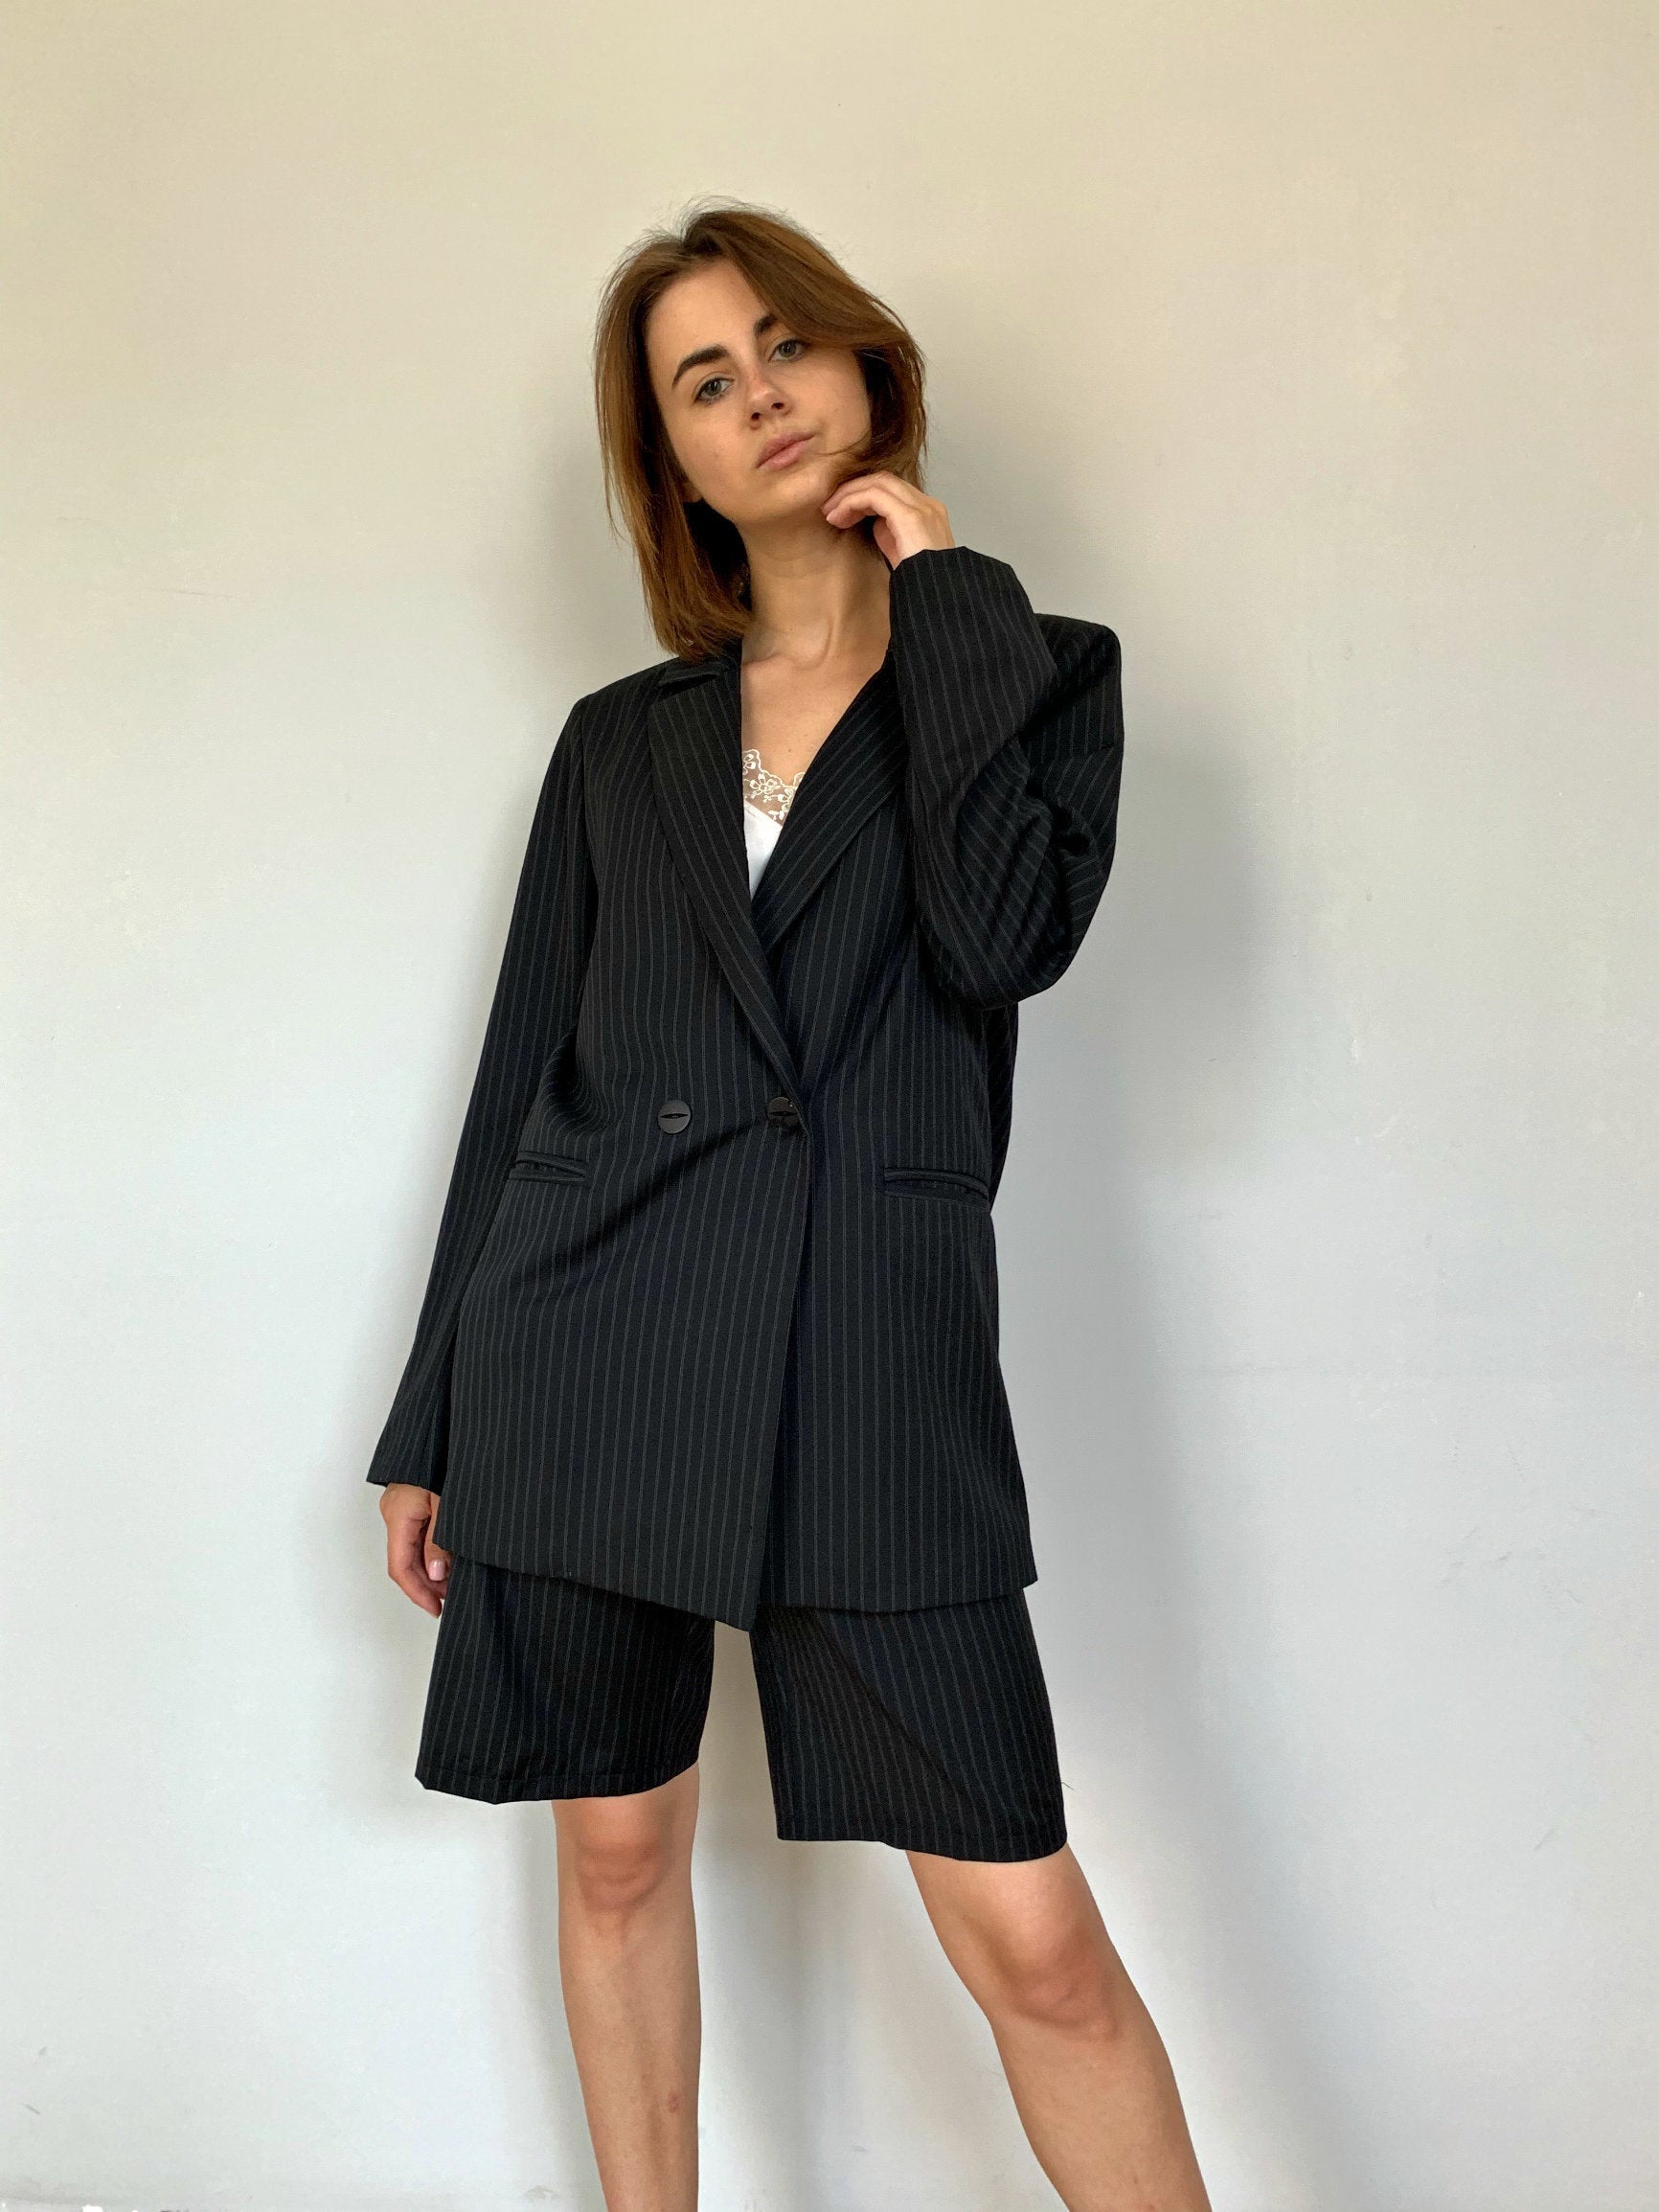  Women's Blazer Shorts Set 2 Piece Outfits Open Front Short  Sleeve Blazer Jacket with Shorts Business Office Plain Suits Black :  Clothing, Shoes & Jewelry